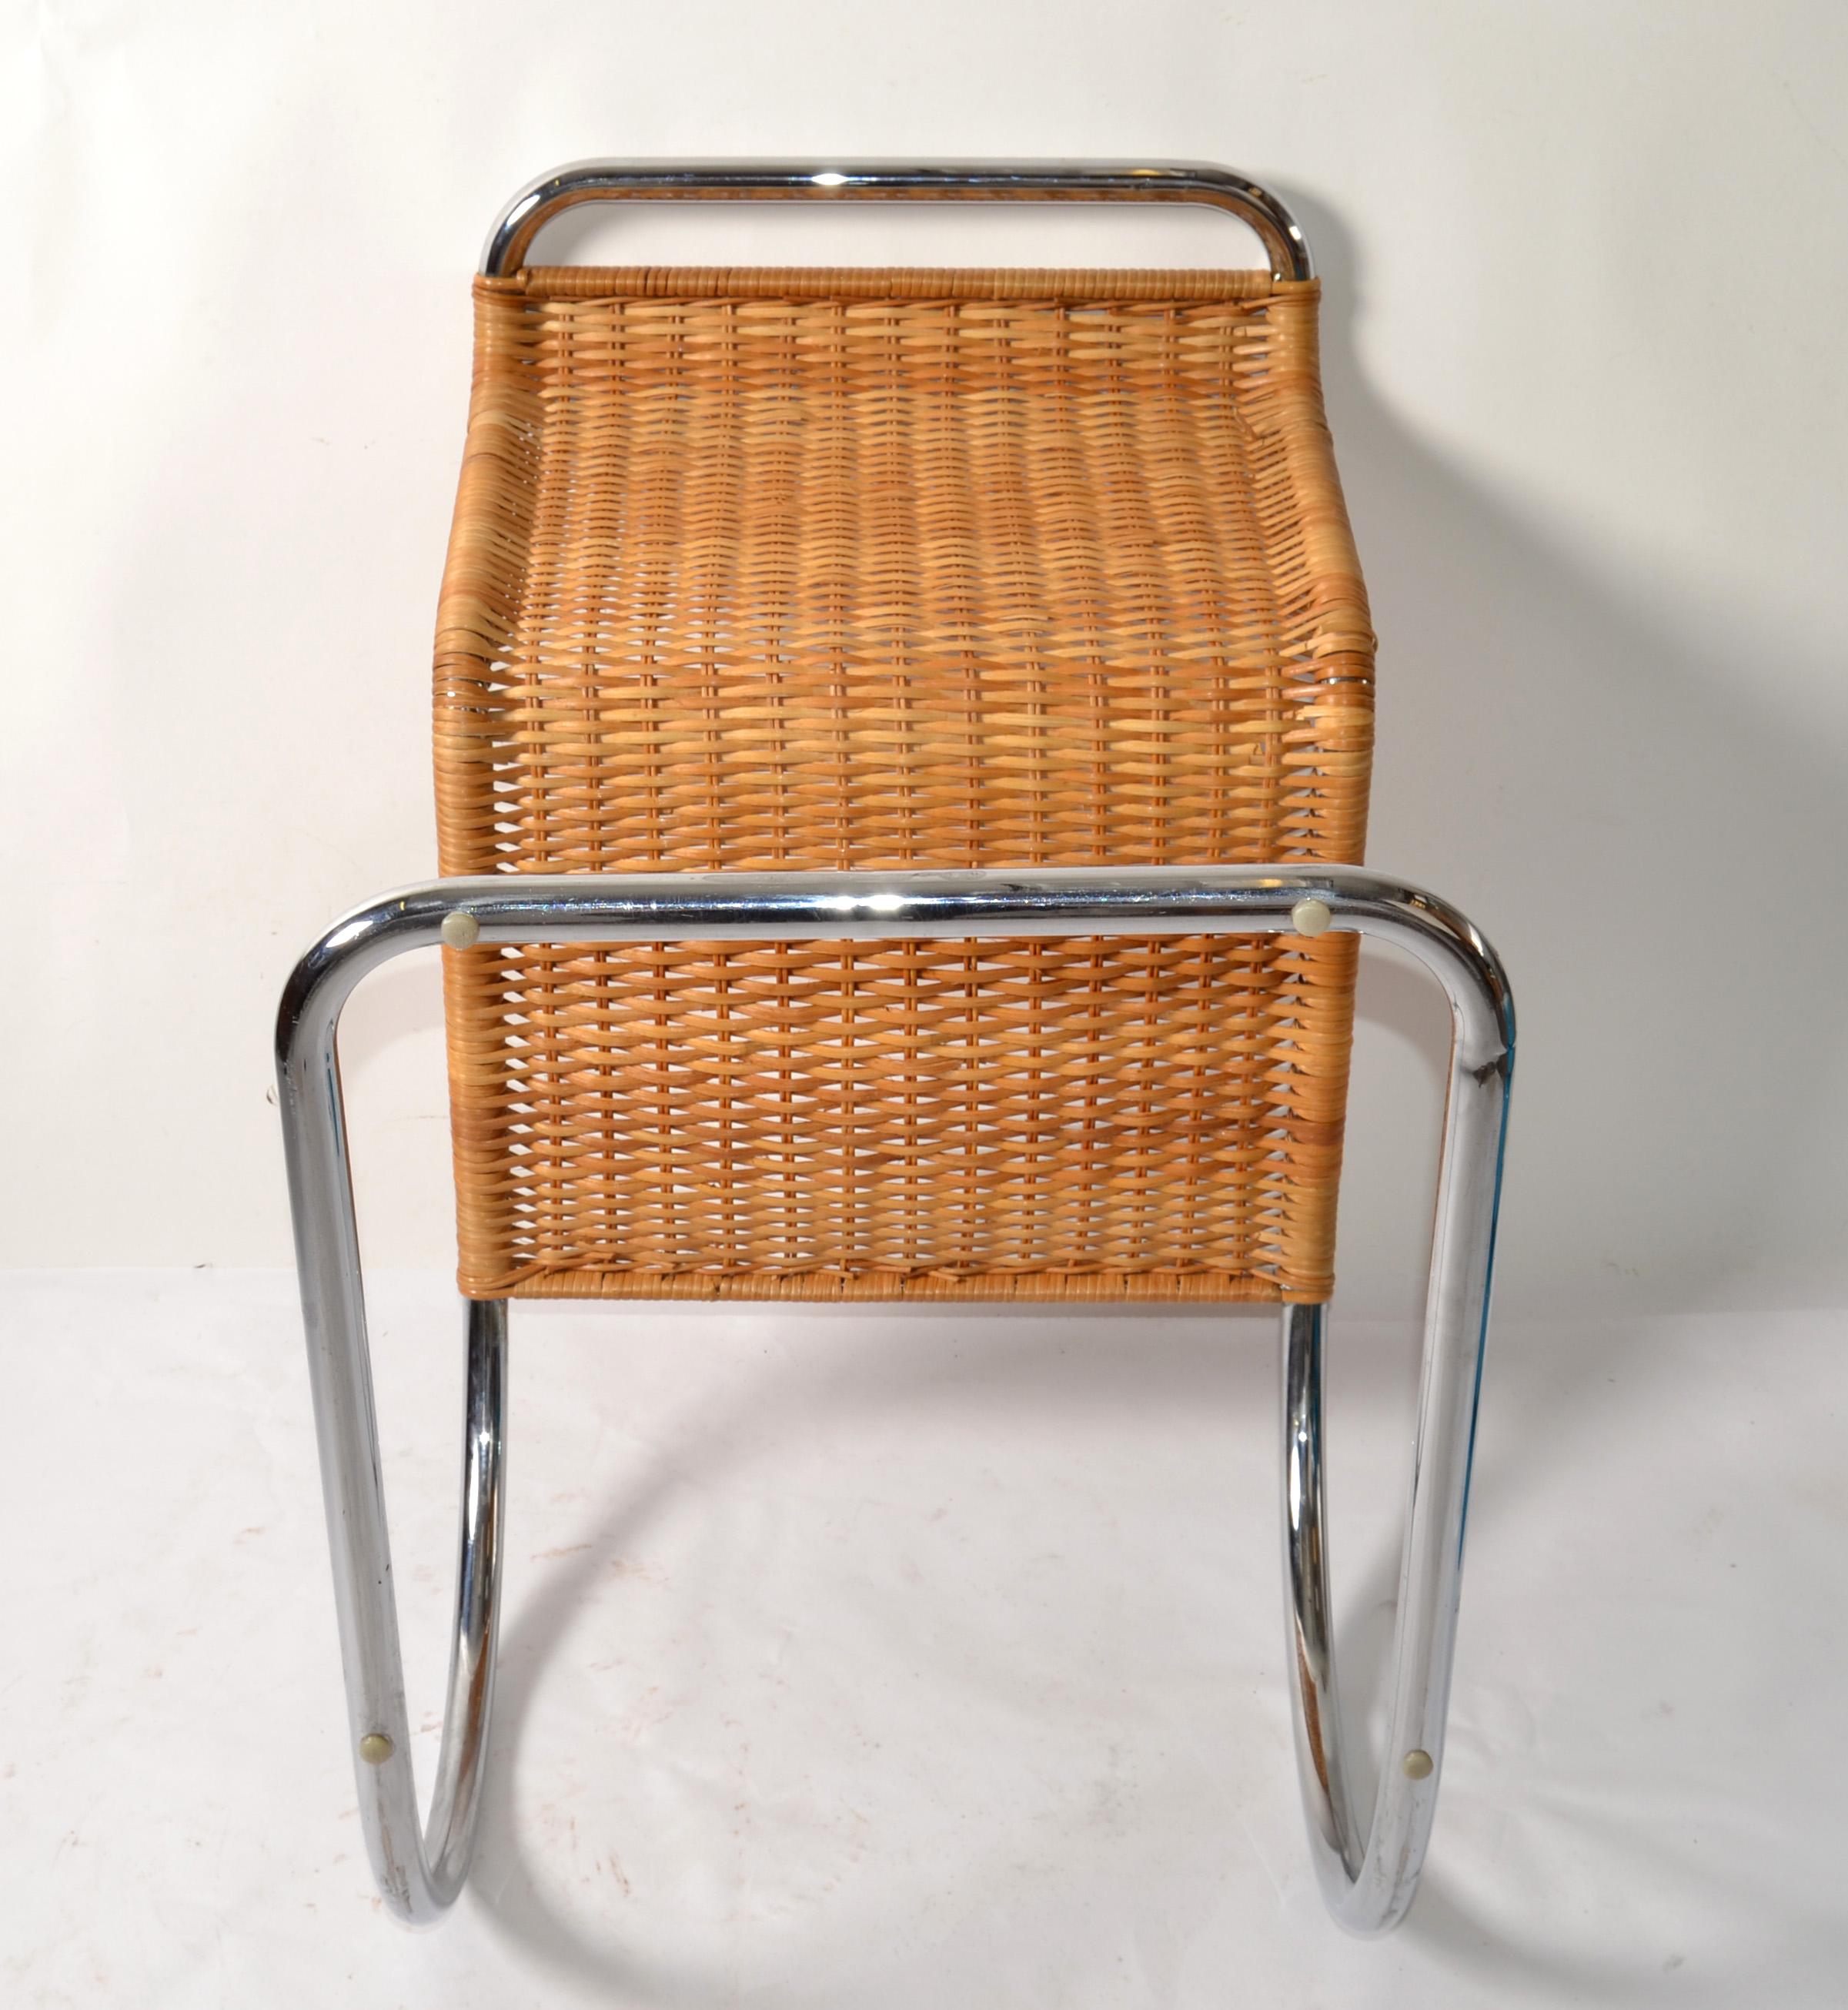 Tubular Ludwig Mies van der Rohe Attributed Mr Chair Armless Woven Cane Seat 70s For Sale 3